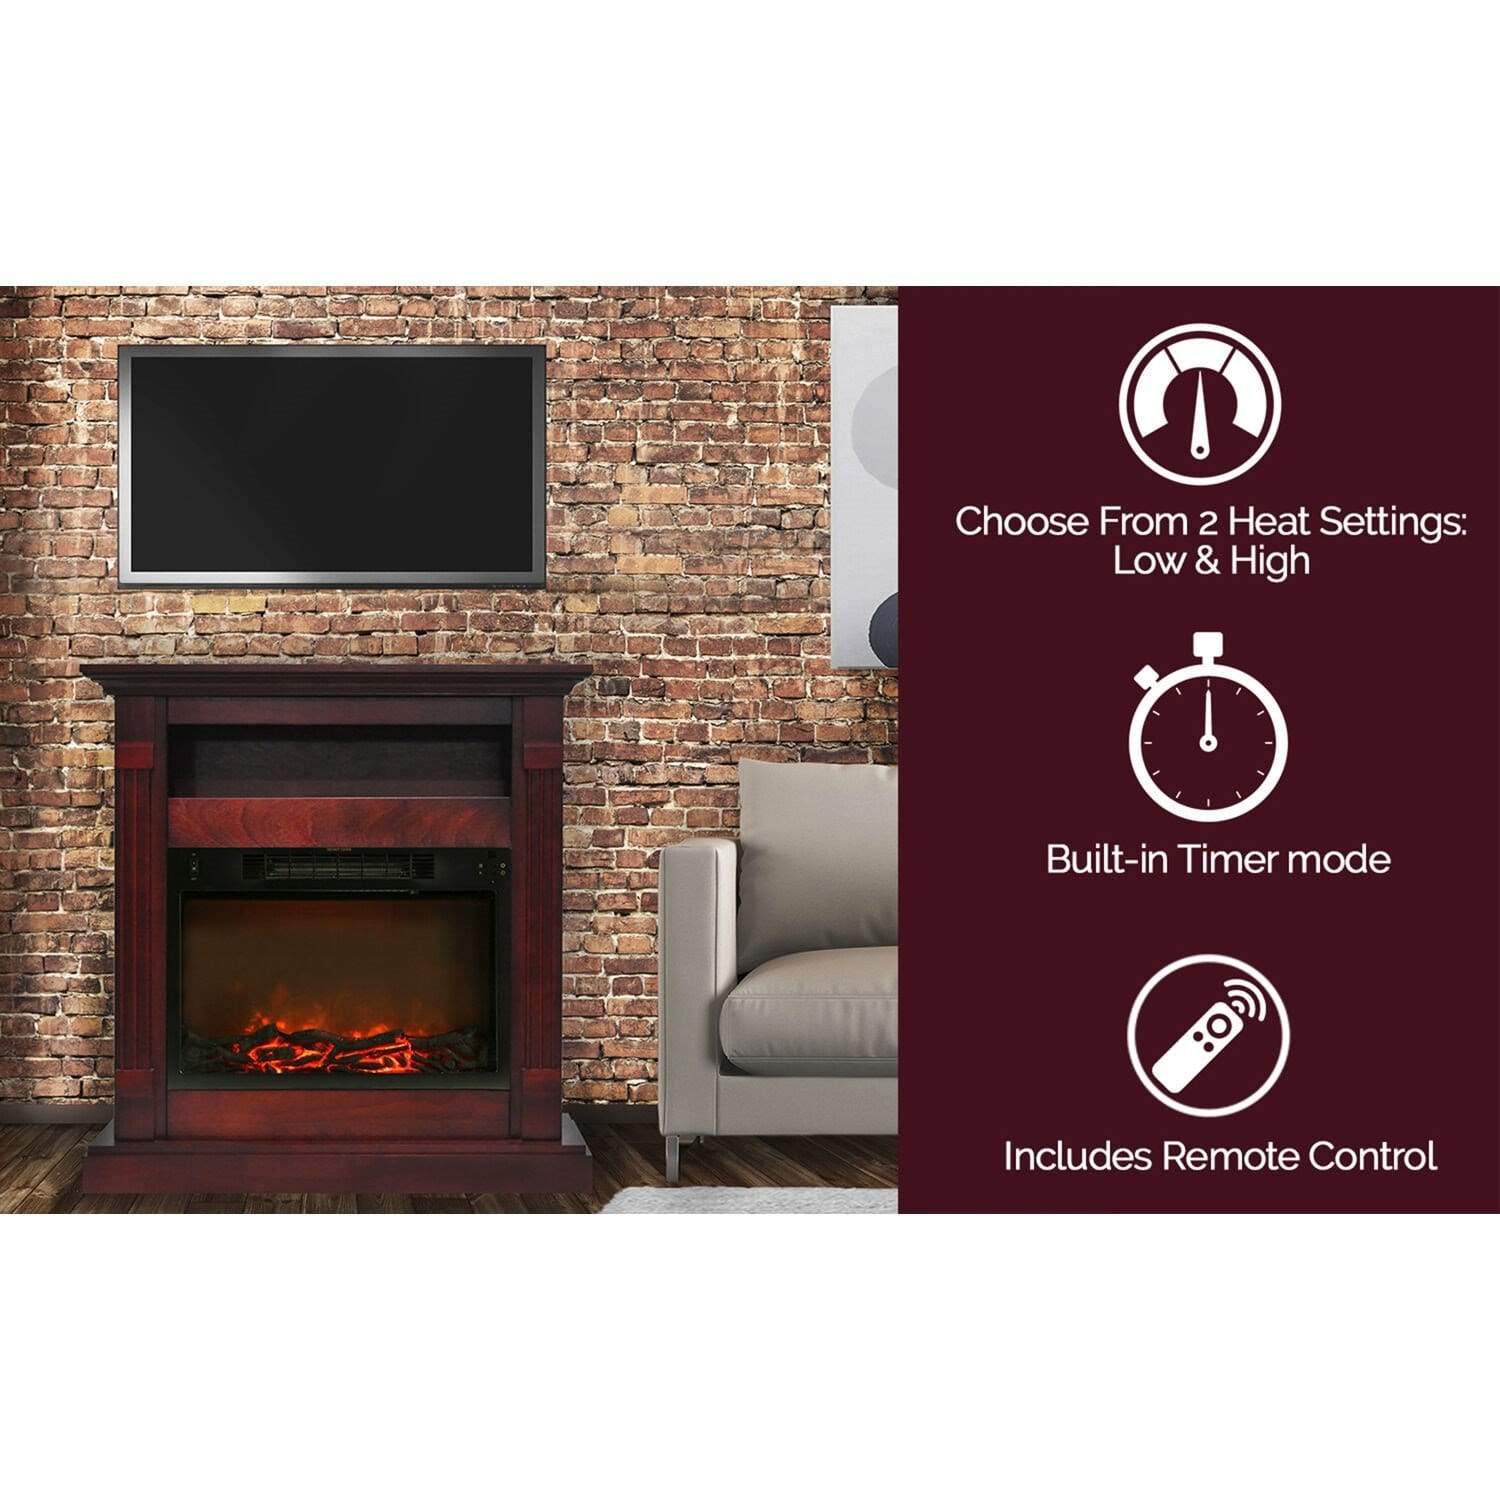 Cambridge Fireplace Mantels and Entertainment Centers Cambridge 34-In. Sienna Electric Fireplace w/ 1500W Log Insert and Cherry Mantel